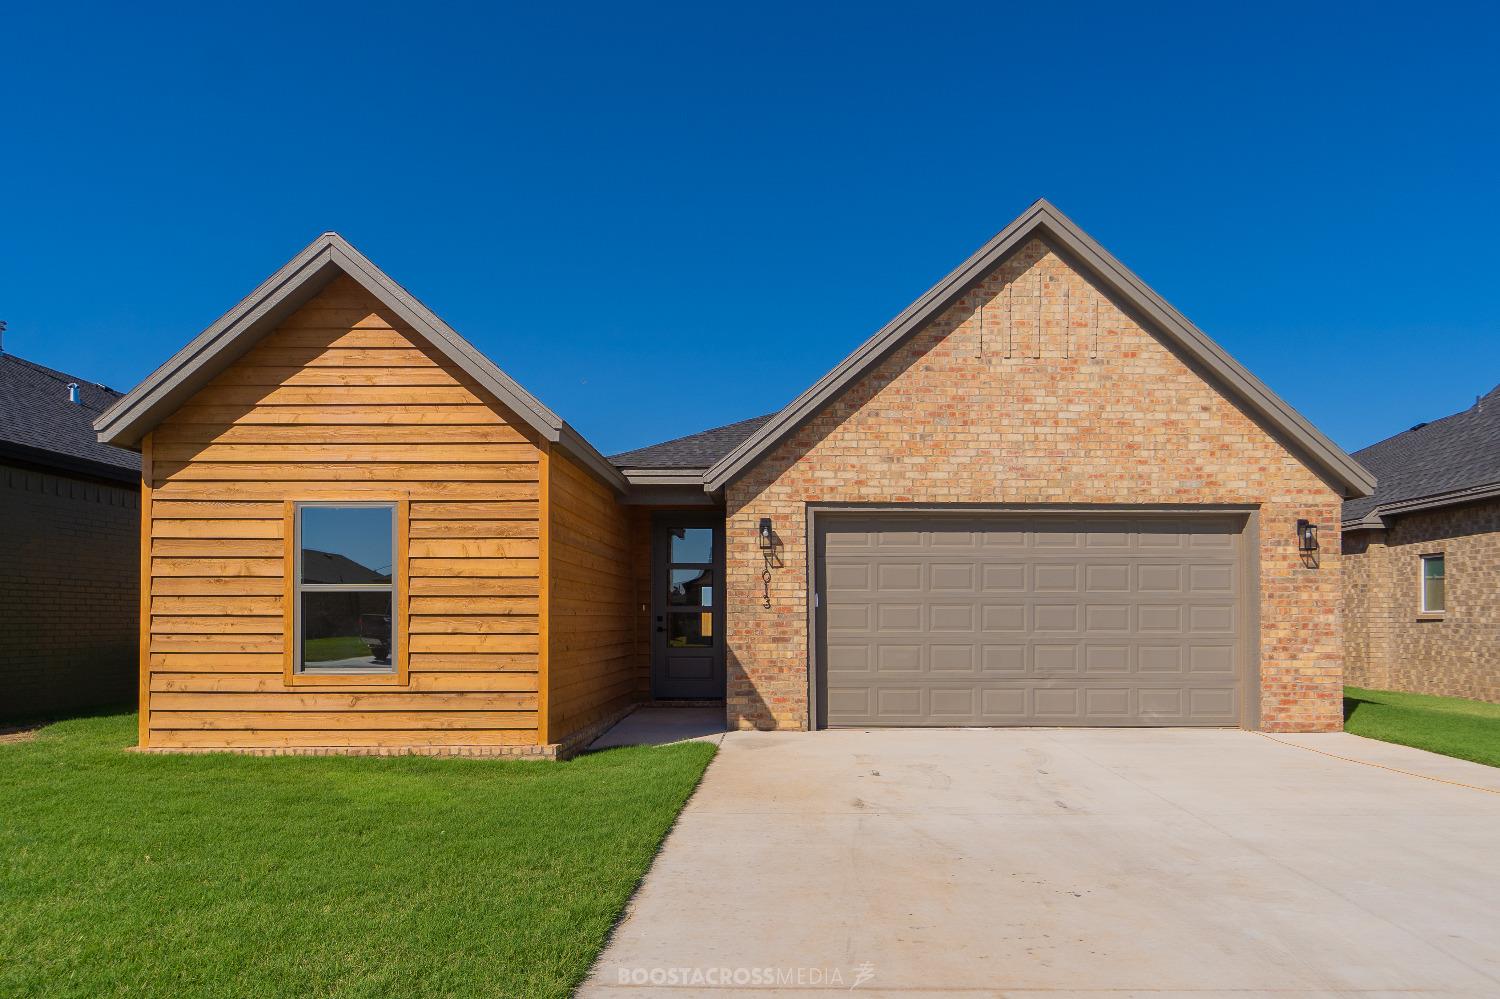 Special Financing on this New Construction home in Uptown West in Frenship ISD. This new home is brilliantly designed with an open floor plan, boasting over 1750 SF with ceiling high shiplap & wood mantle fireplace & tiled inlay with gas logs and built-in floating shelves. Highlights includes vaulted ceilings in front bedroom & entry area; special ceilings in living room & master bedroom. This jewel features 3 bedrooms 2 & 1/2 bathrooms with eye popping designer finishes throughout. Gourmet kitchen with 5 burner gas cooktop, built-in microwave, ample white cabinetry, quartzite countertops, black hardware, island w/breakfast bar and seating in dining room. Isolated Master bedroom with spa inspired bathroom; double vanity, separate shower w/glass door & separate soaking tub & oversized master closet. Huge laundry with quartzite countertops & broom closet. Mud Room off garage. Don't miss your opportunity to make this home yours.